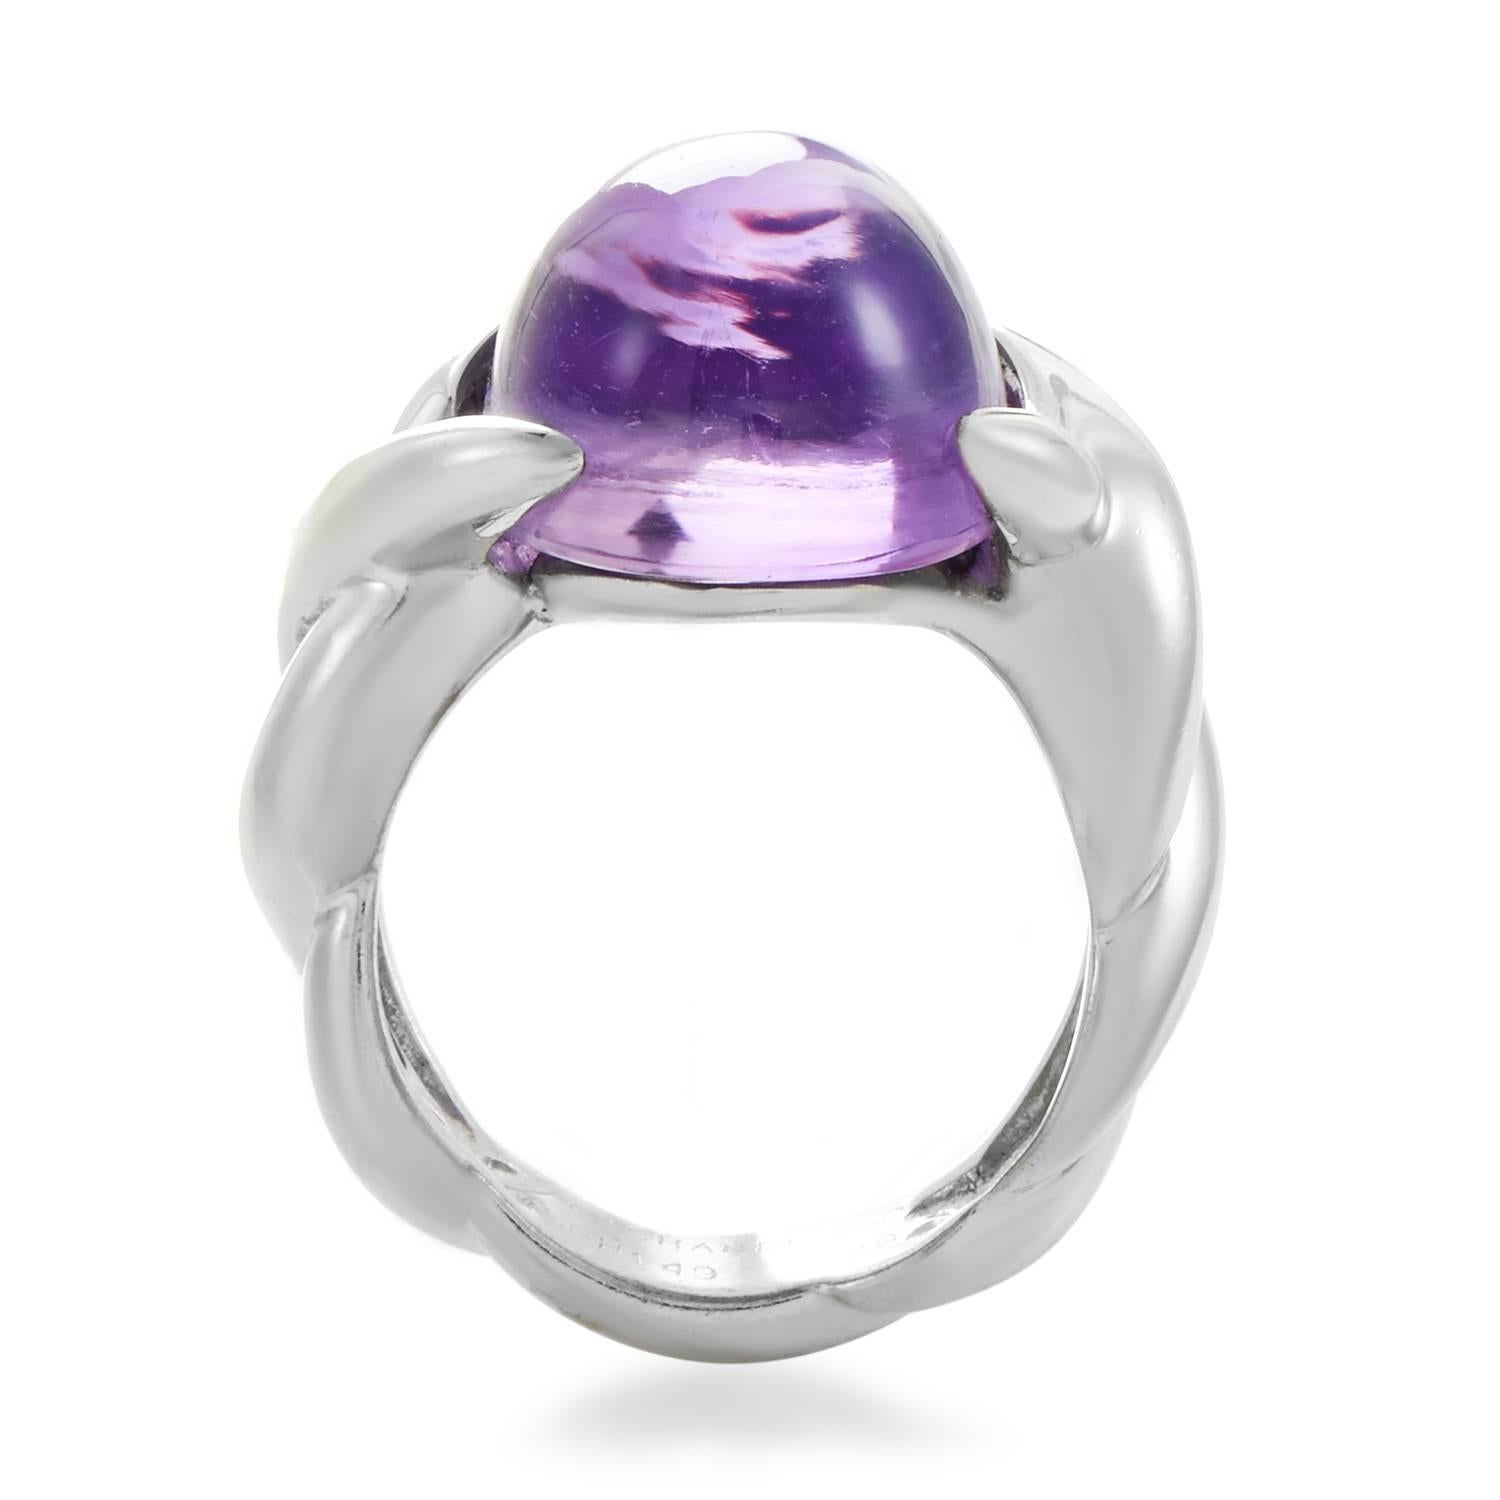 Focusing the attention on the spellbinding nuance, immaculate shape and captivating depth of the delightful amethyst, this fabulous ring from Chanel boasts a splendidly designed and expertly crafted 18K white gold body to perfectly complete the